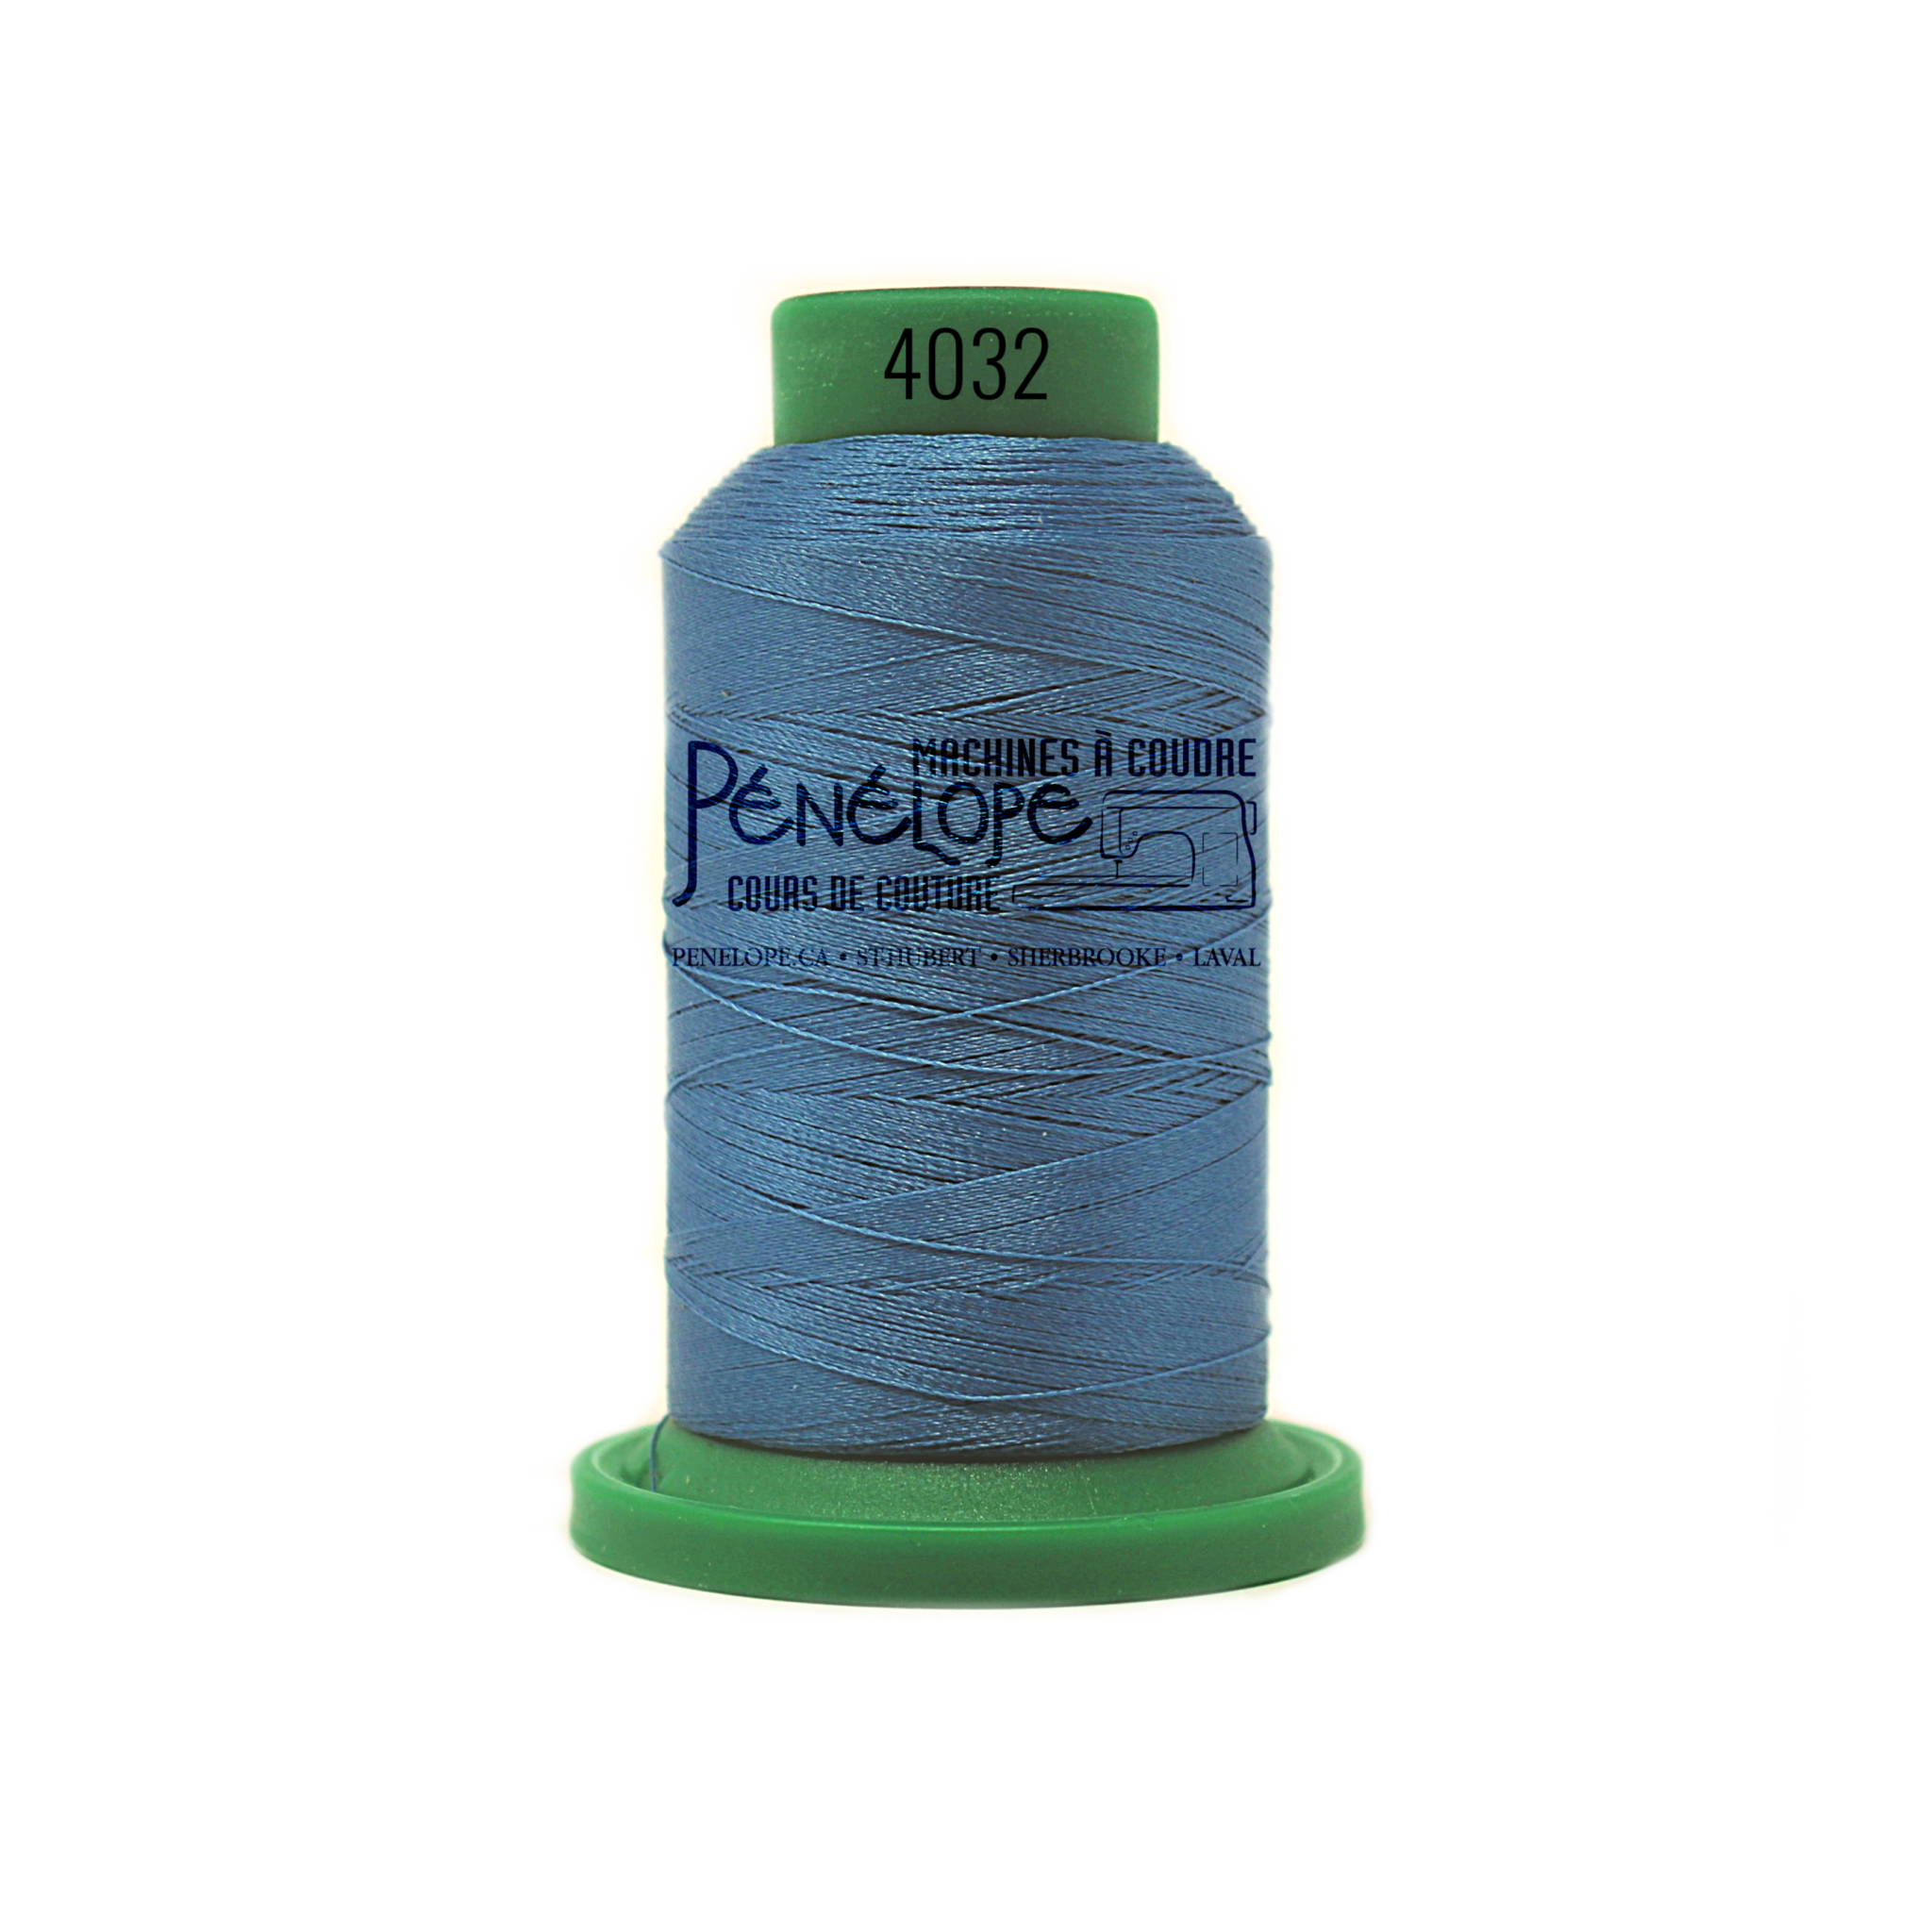 Isacord Isacord sewing and embroidery thread 4032